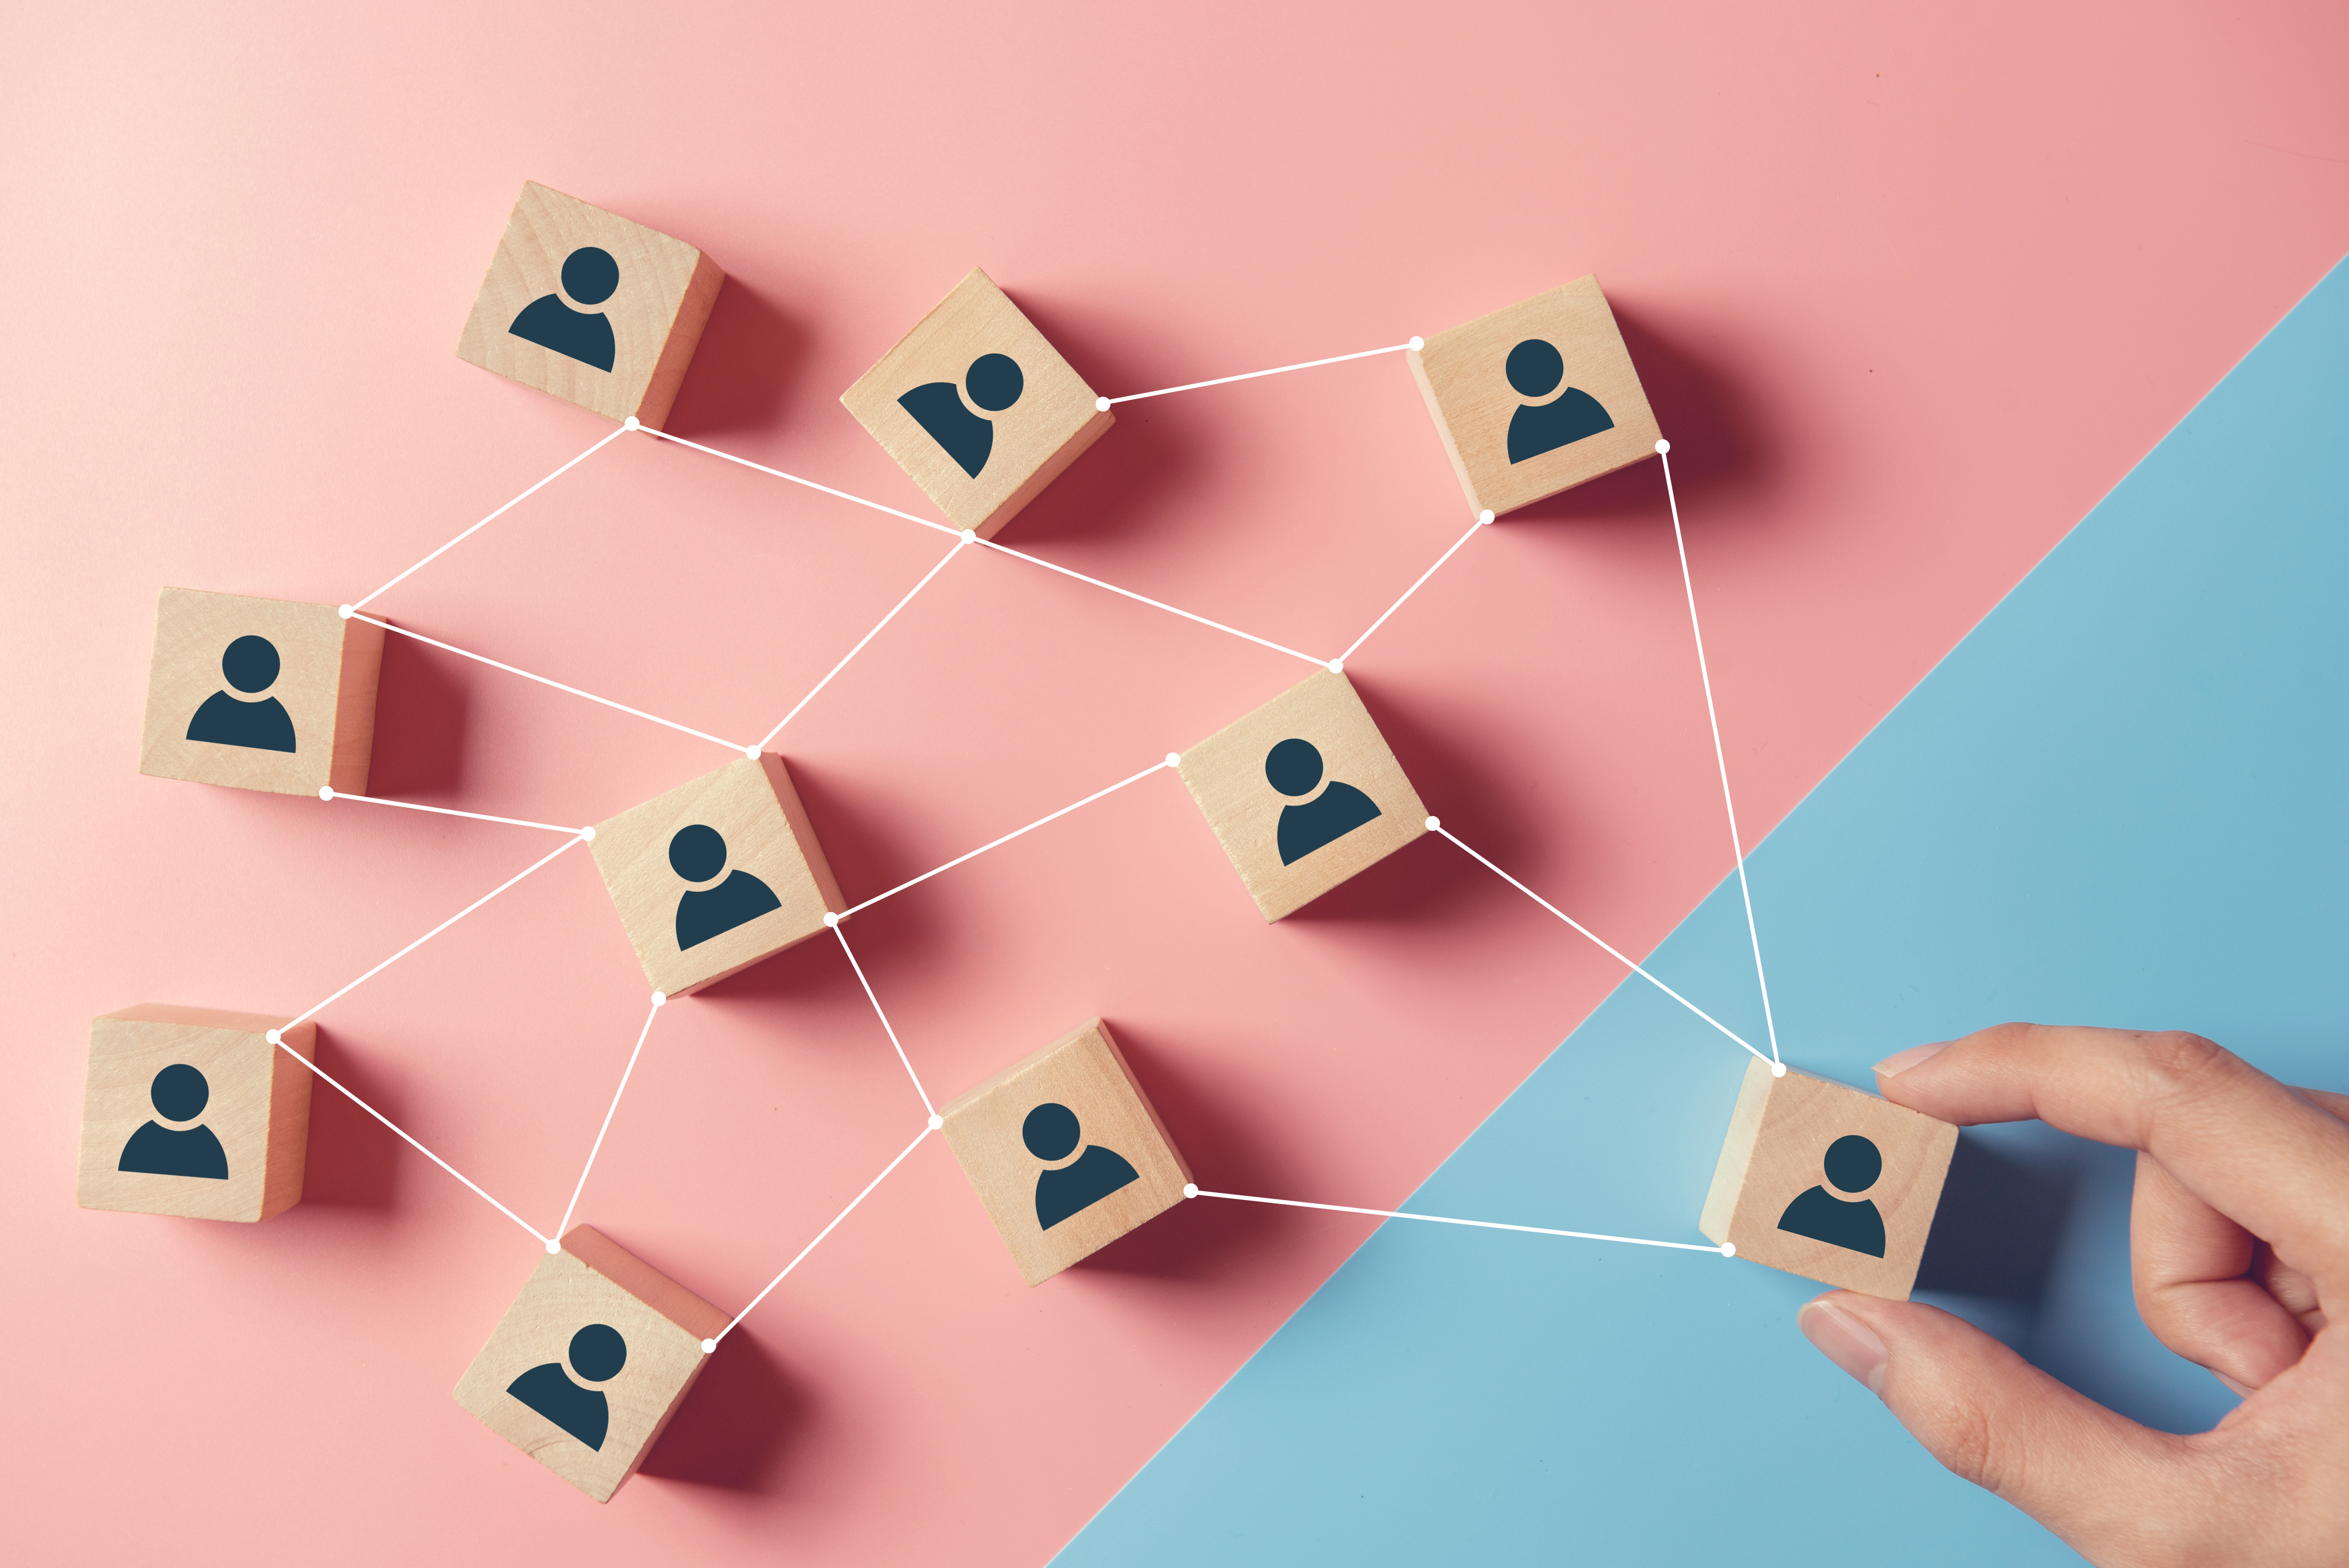 Building a strong team, Wooden blocks with people icon on blue and pink background, Human resources and management concept.